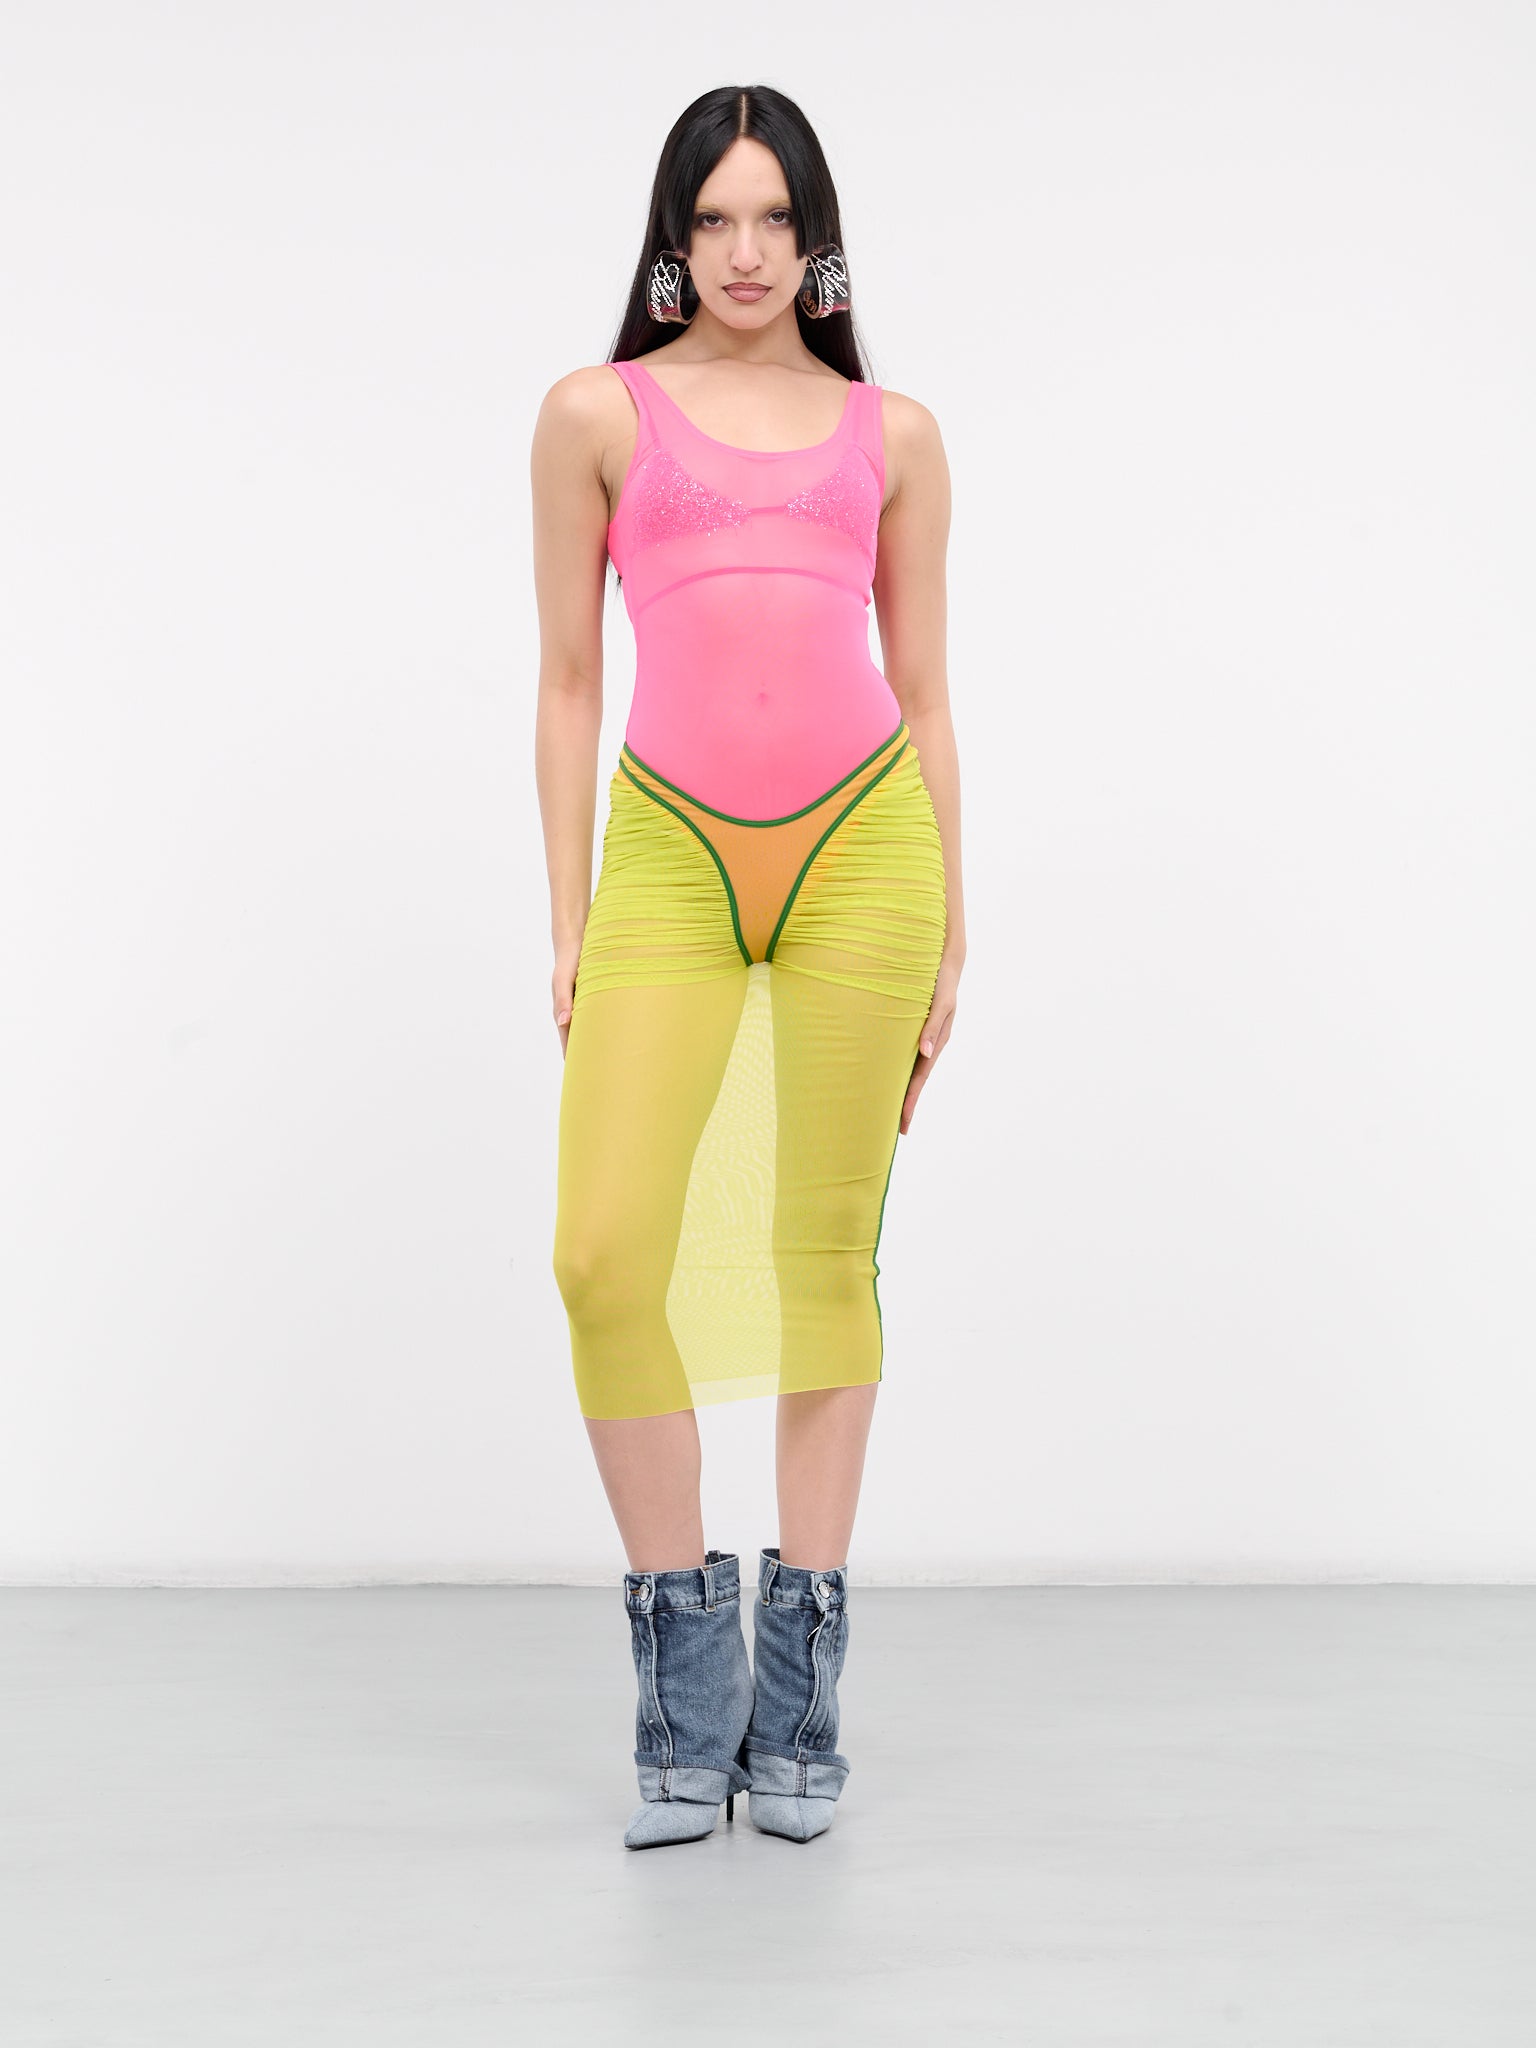 Ufby-Yoma Bodysuit (A10752-UFBY-YOMA-UW-PINK)